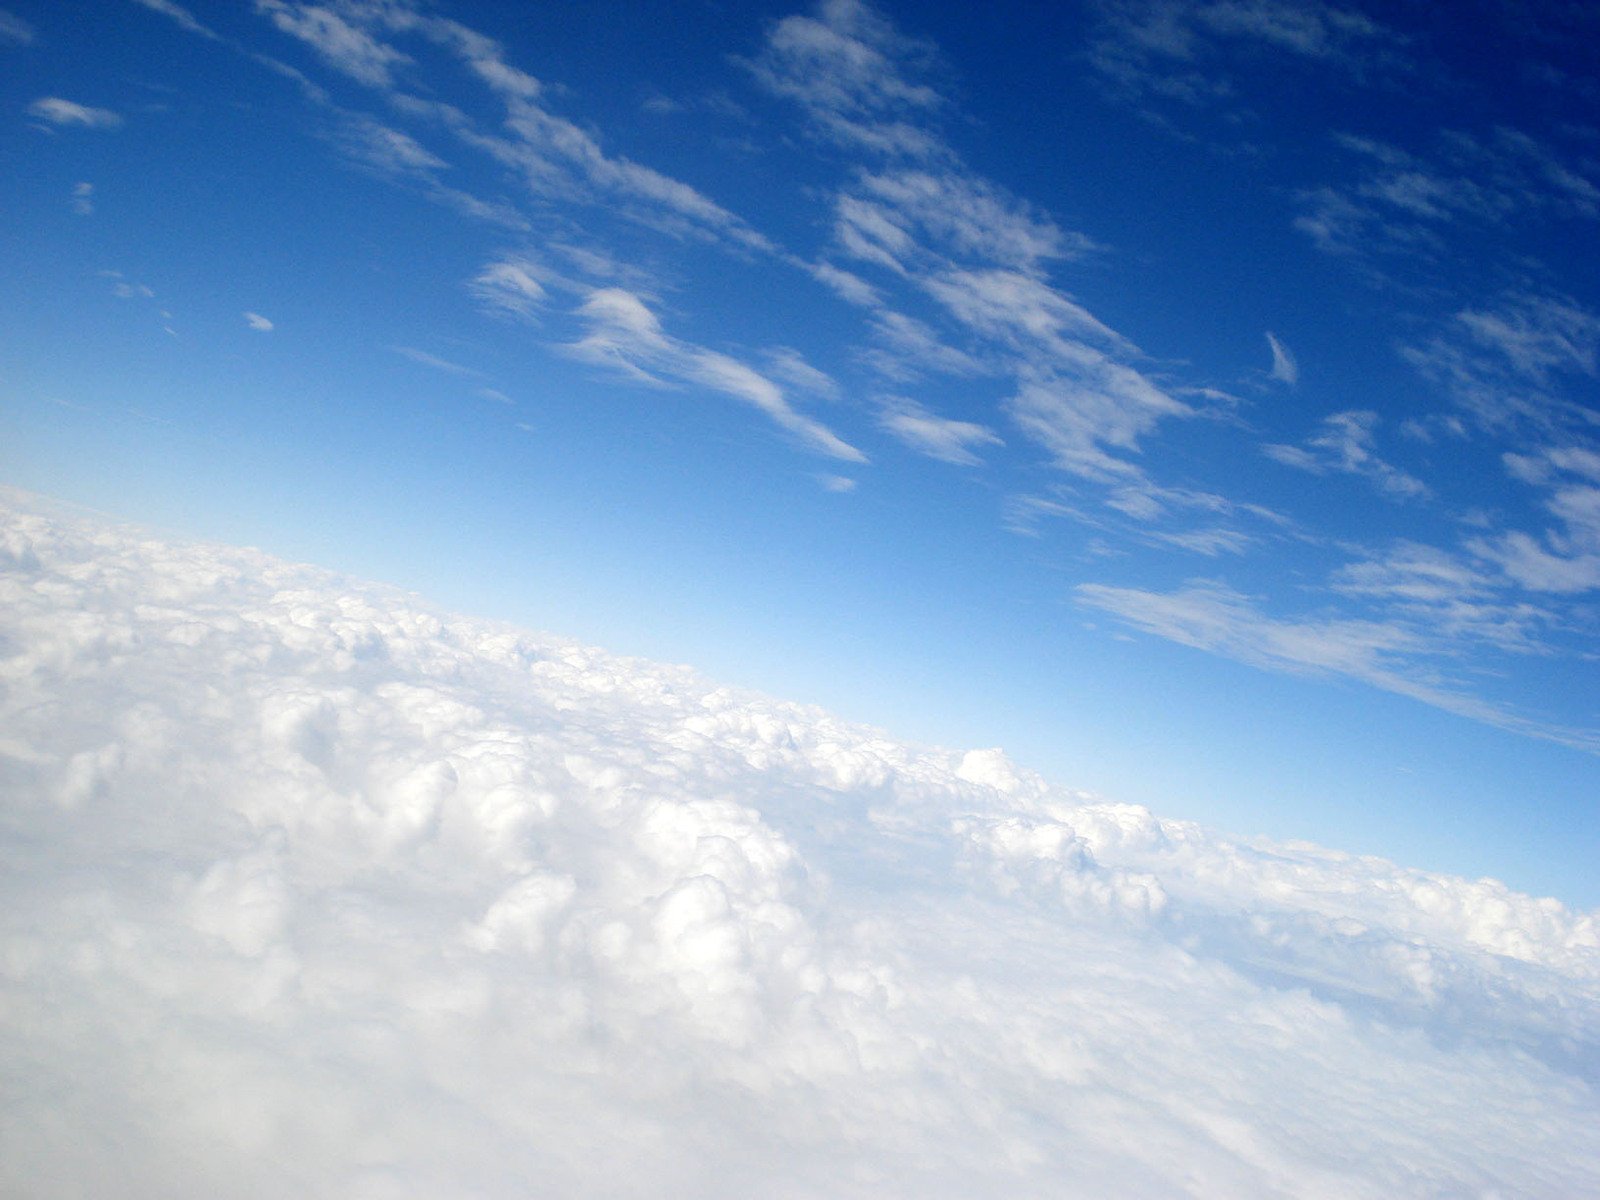 the view from an airplane over some very white clouds